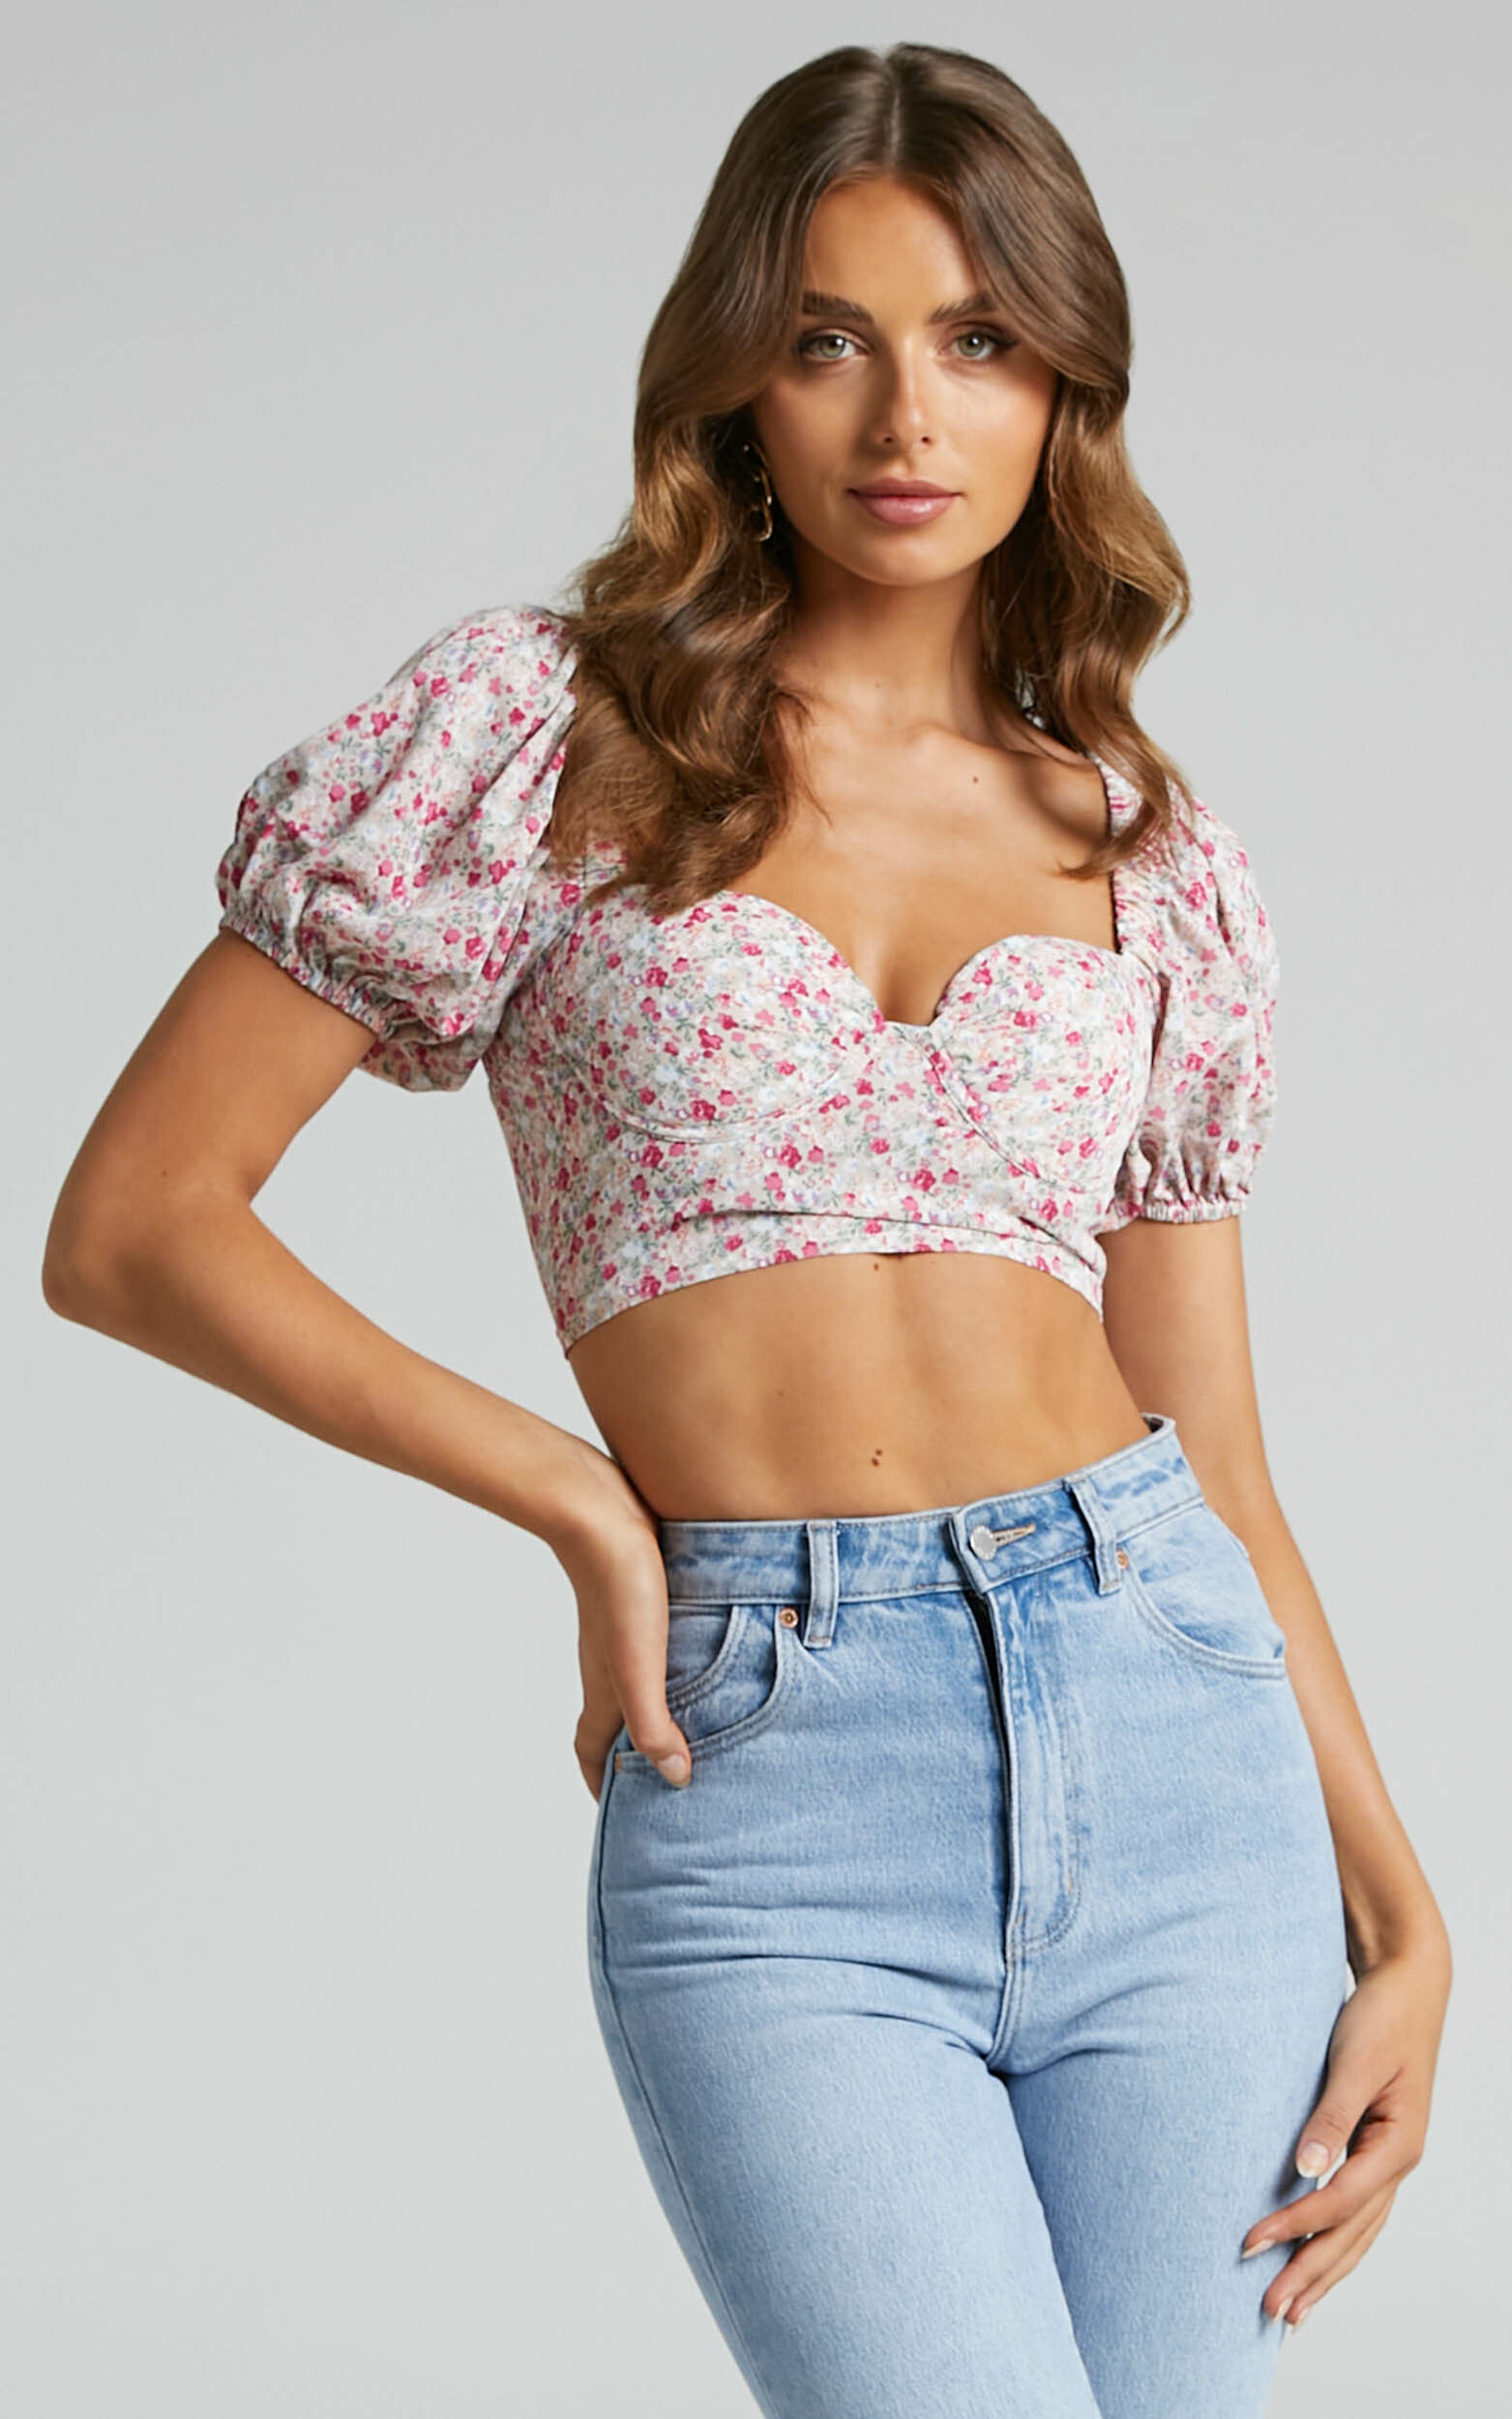 Solania Puff Sleeve Bust Cup Crop Top in White Floral - 04, WHT1, hi-res image number null